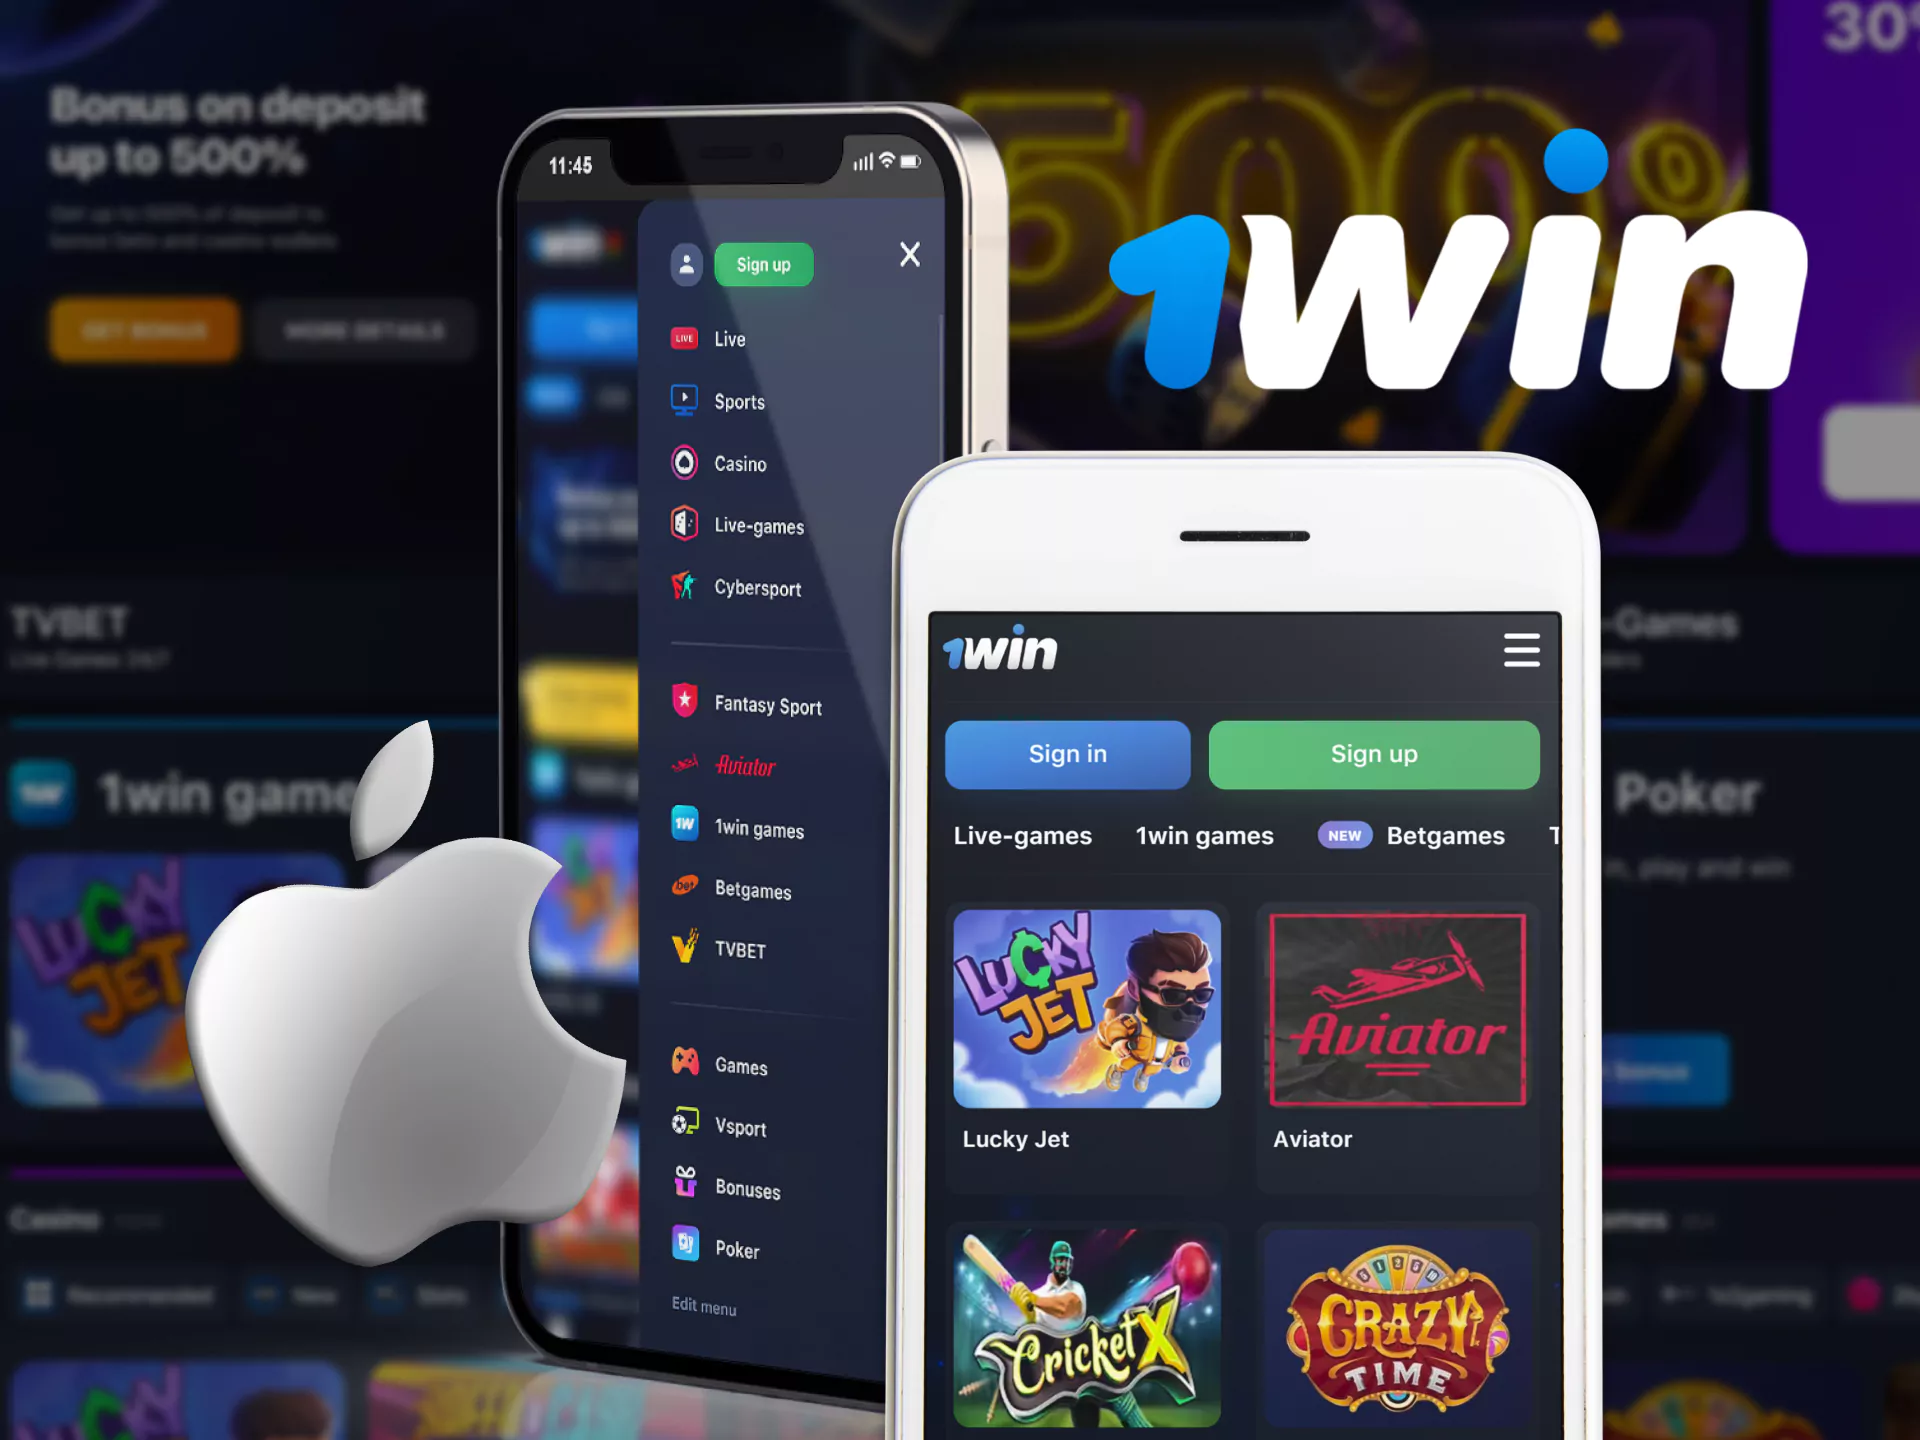 You can place bets with 1Win on your phone with the IOS system.